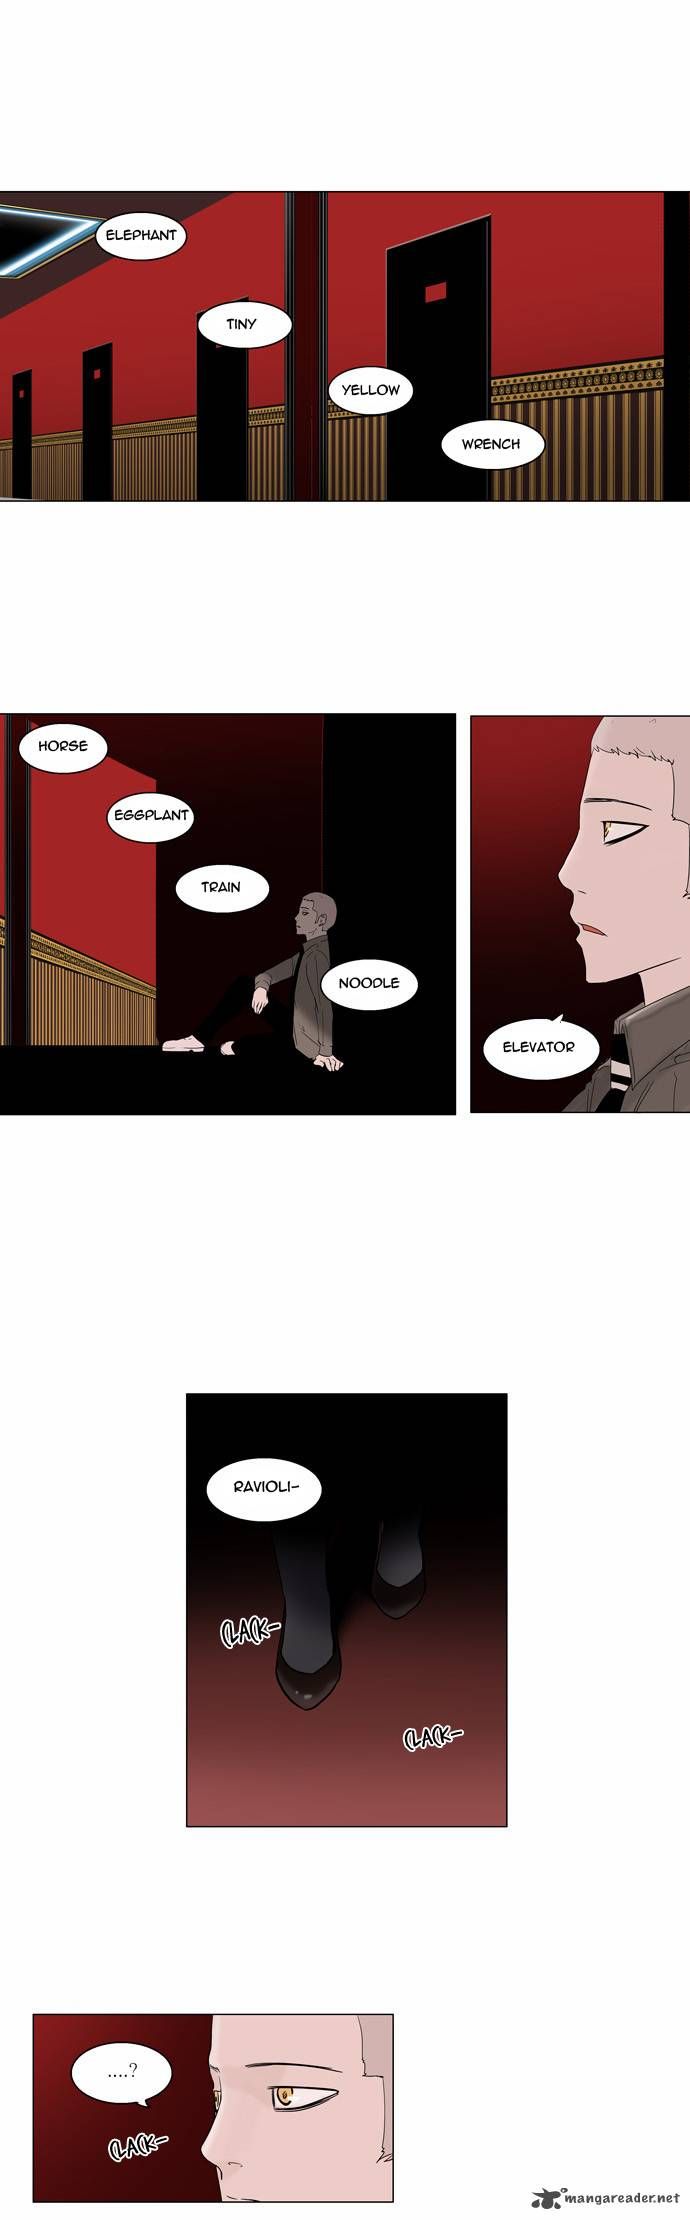 Tower of God 93